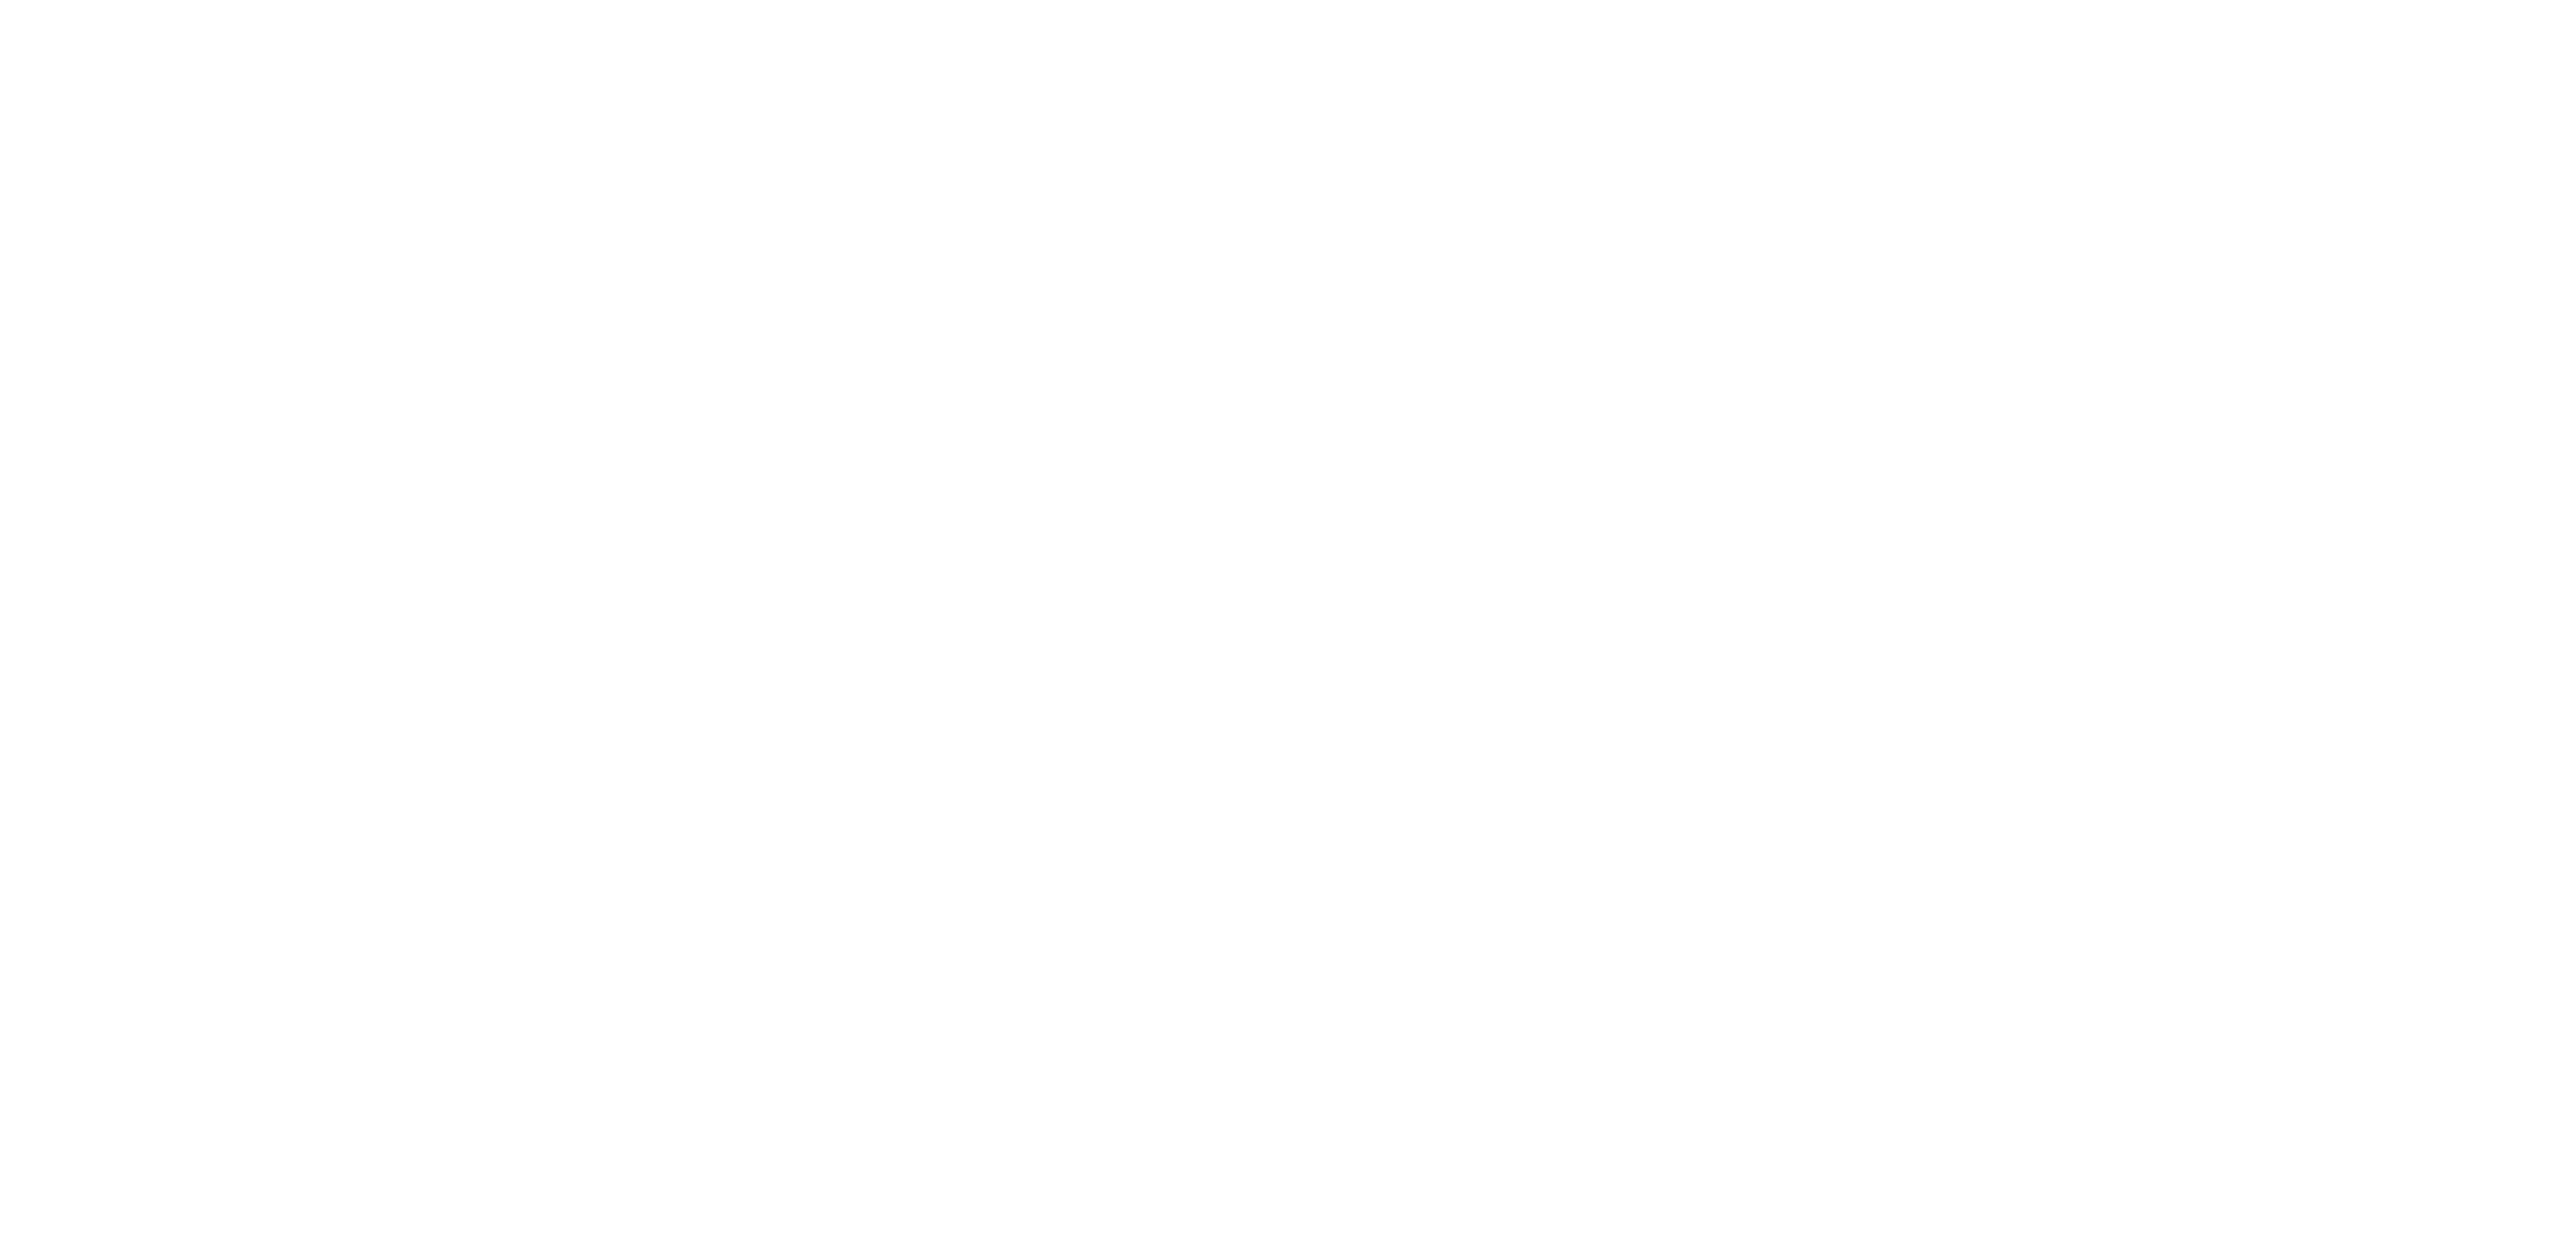 Rise Up Productions